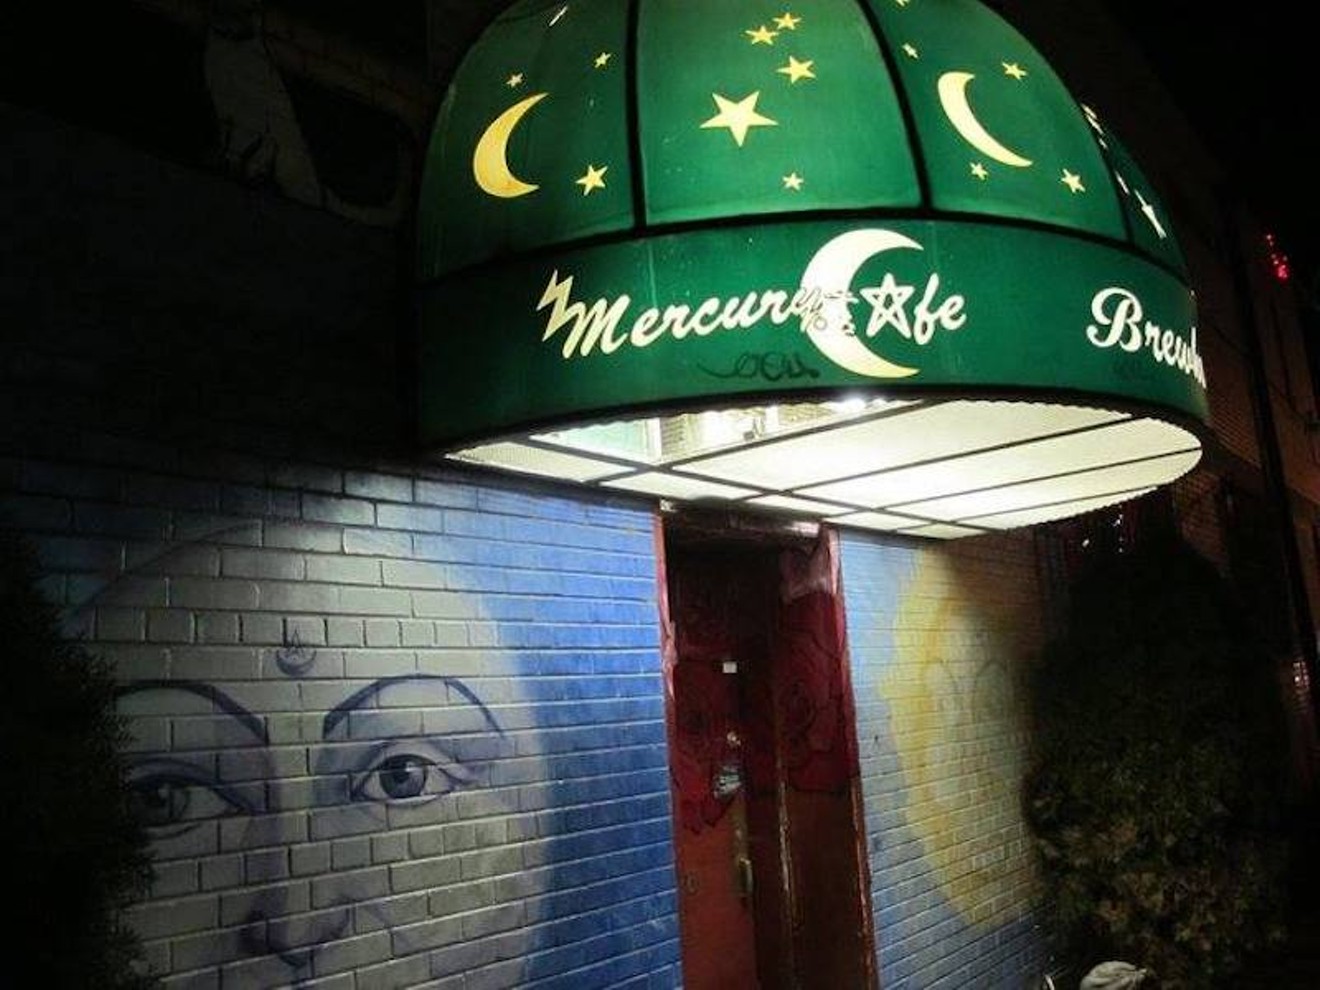 The Mercury Cafe won a Best of Denver for Best Open-Mic Night this year.